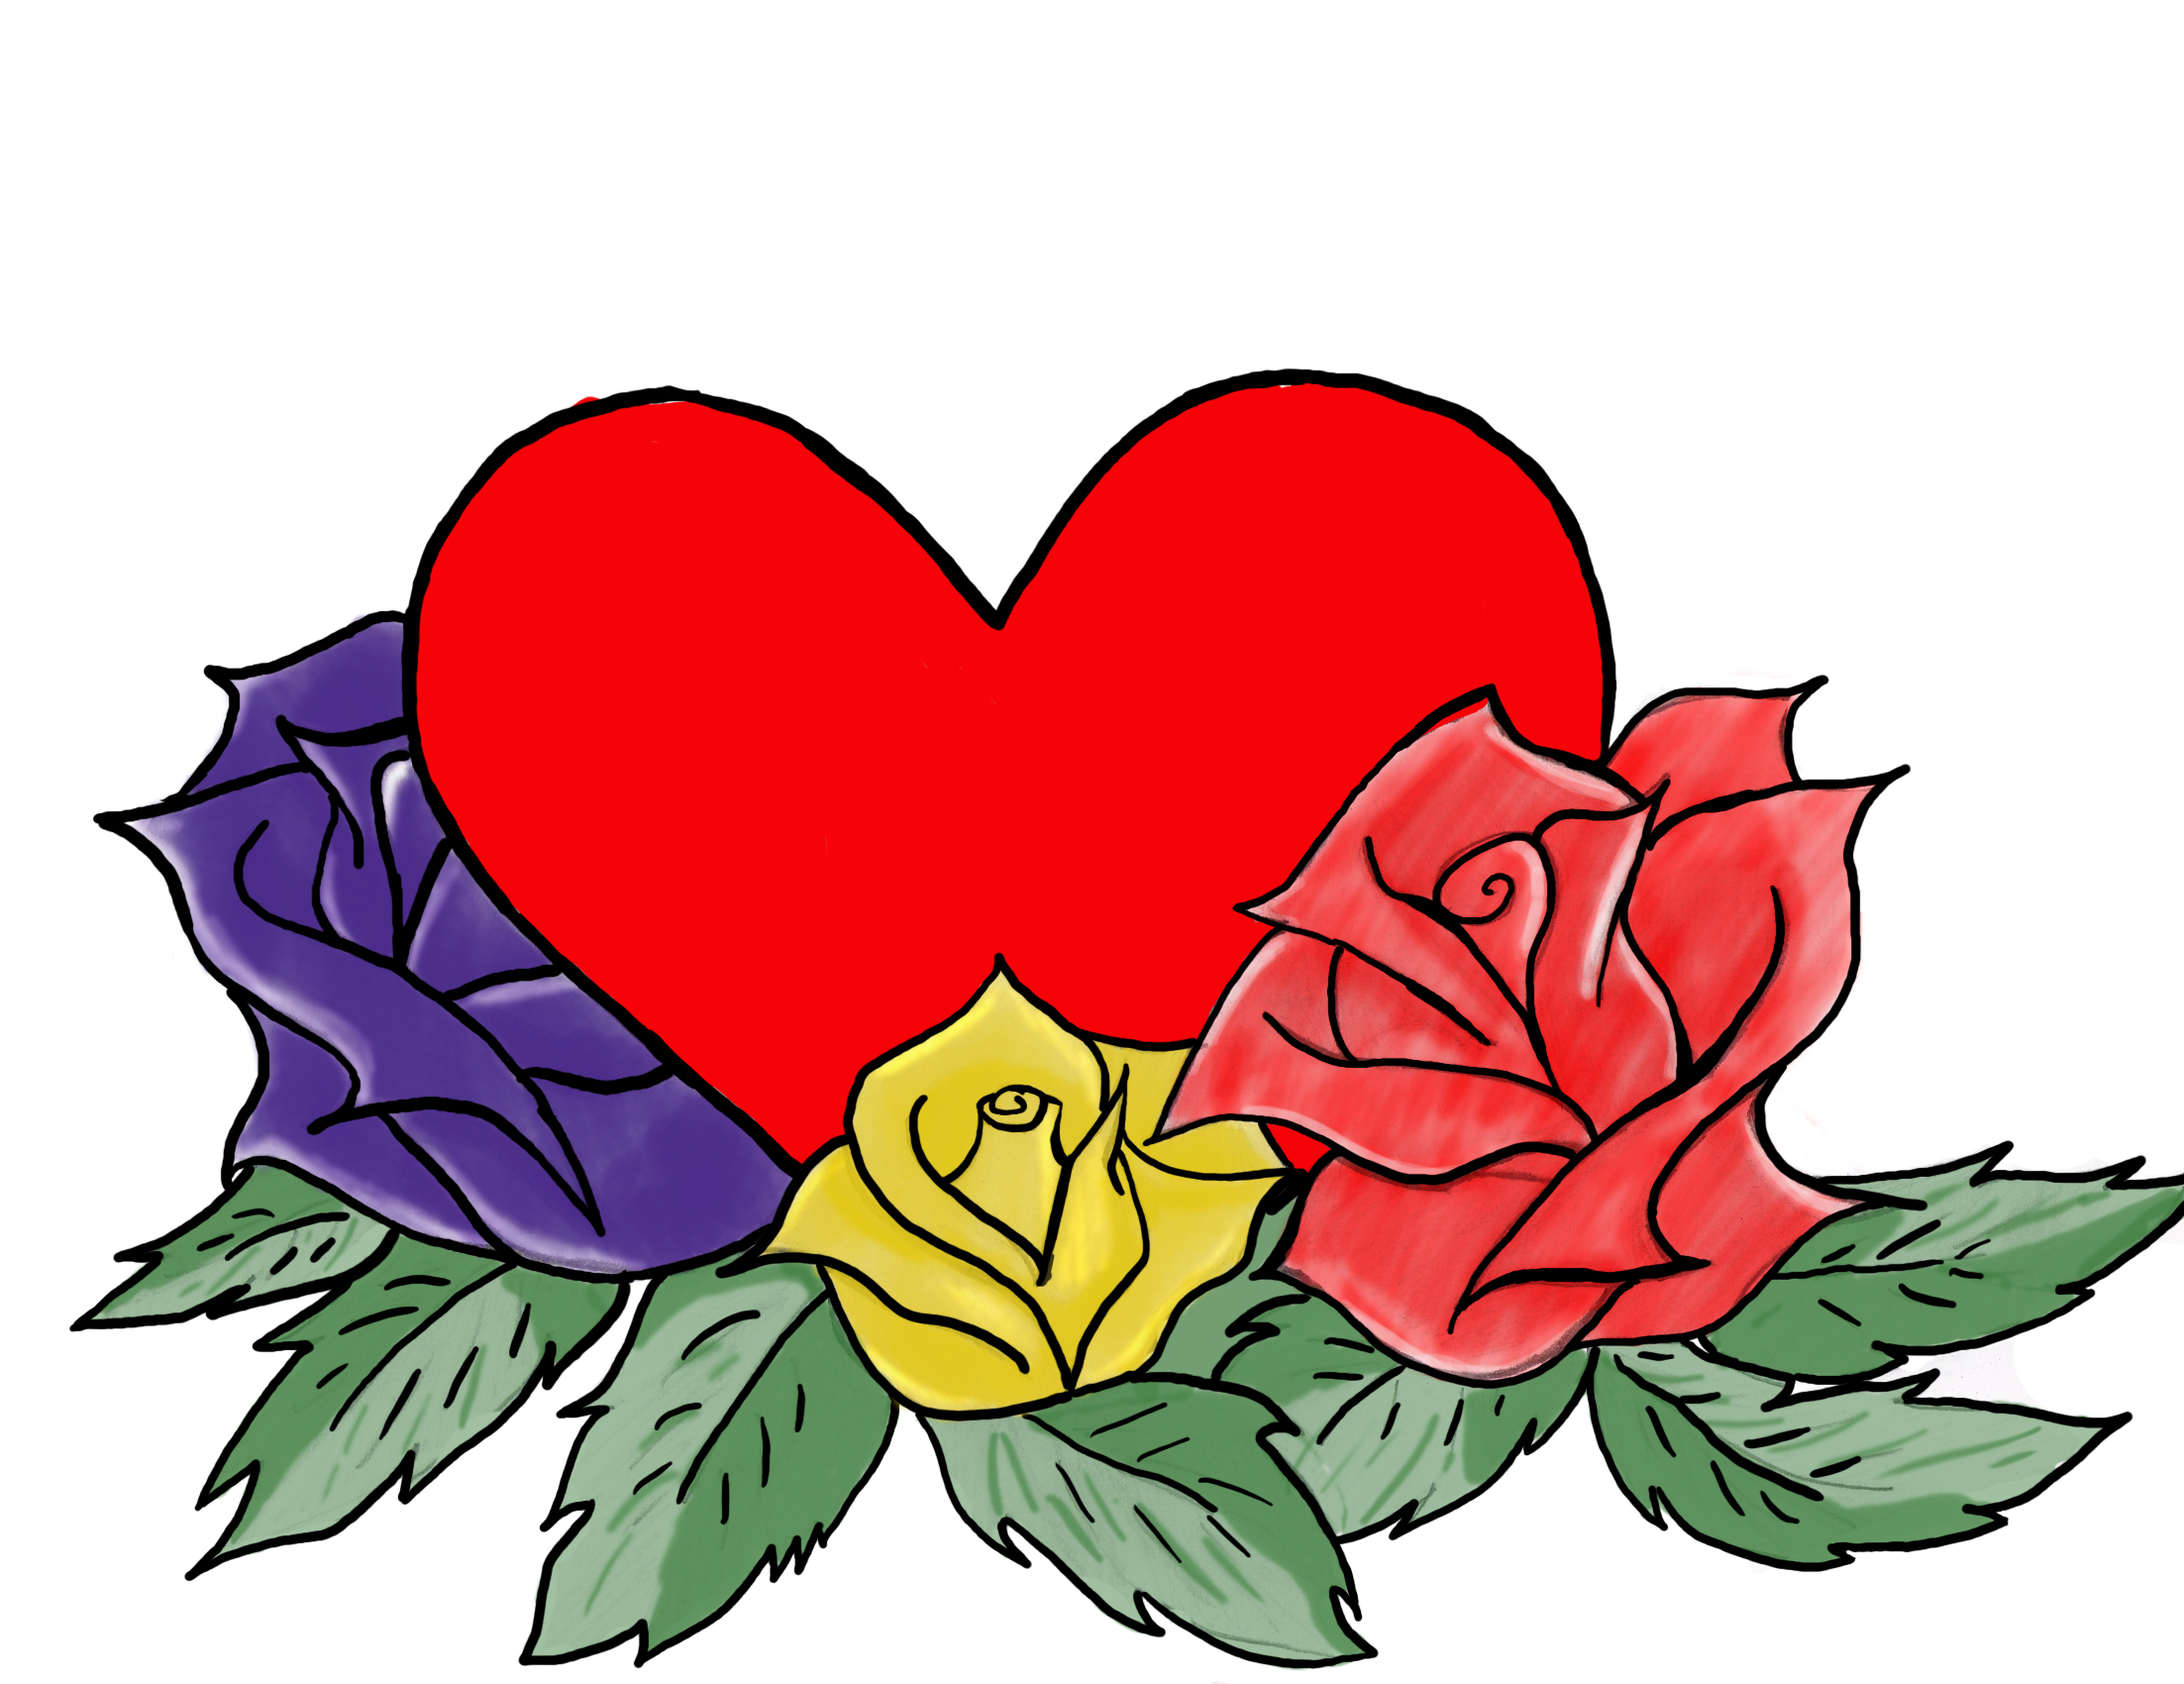 Roses And Hearts - ClipArt Best